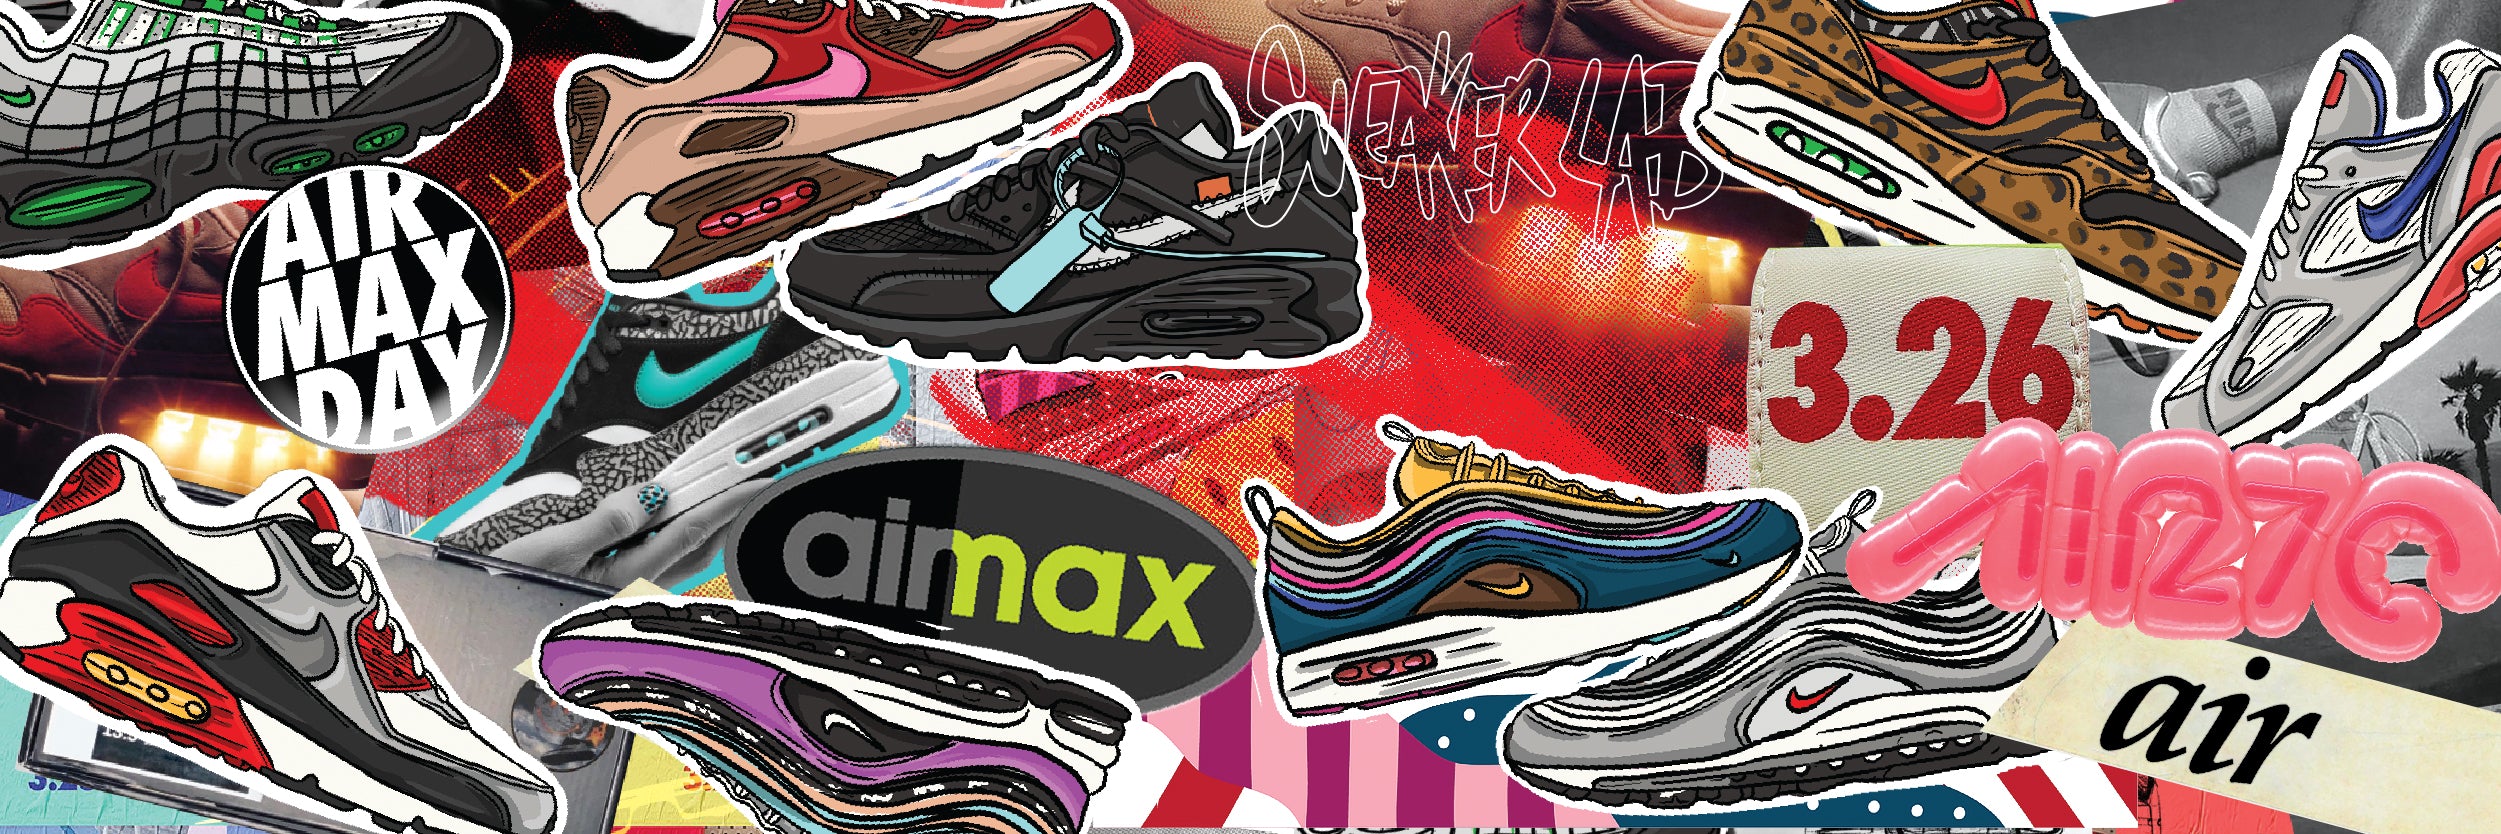 Nike Air Max Day History & Sneaker Release Facts You Need to Know